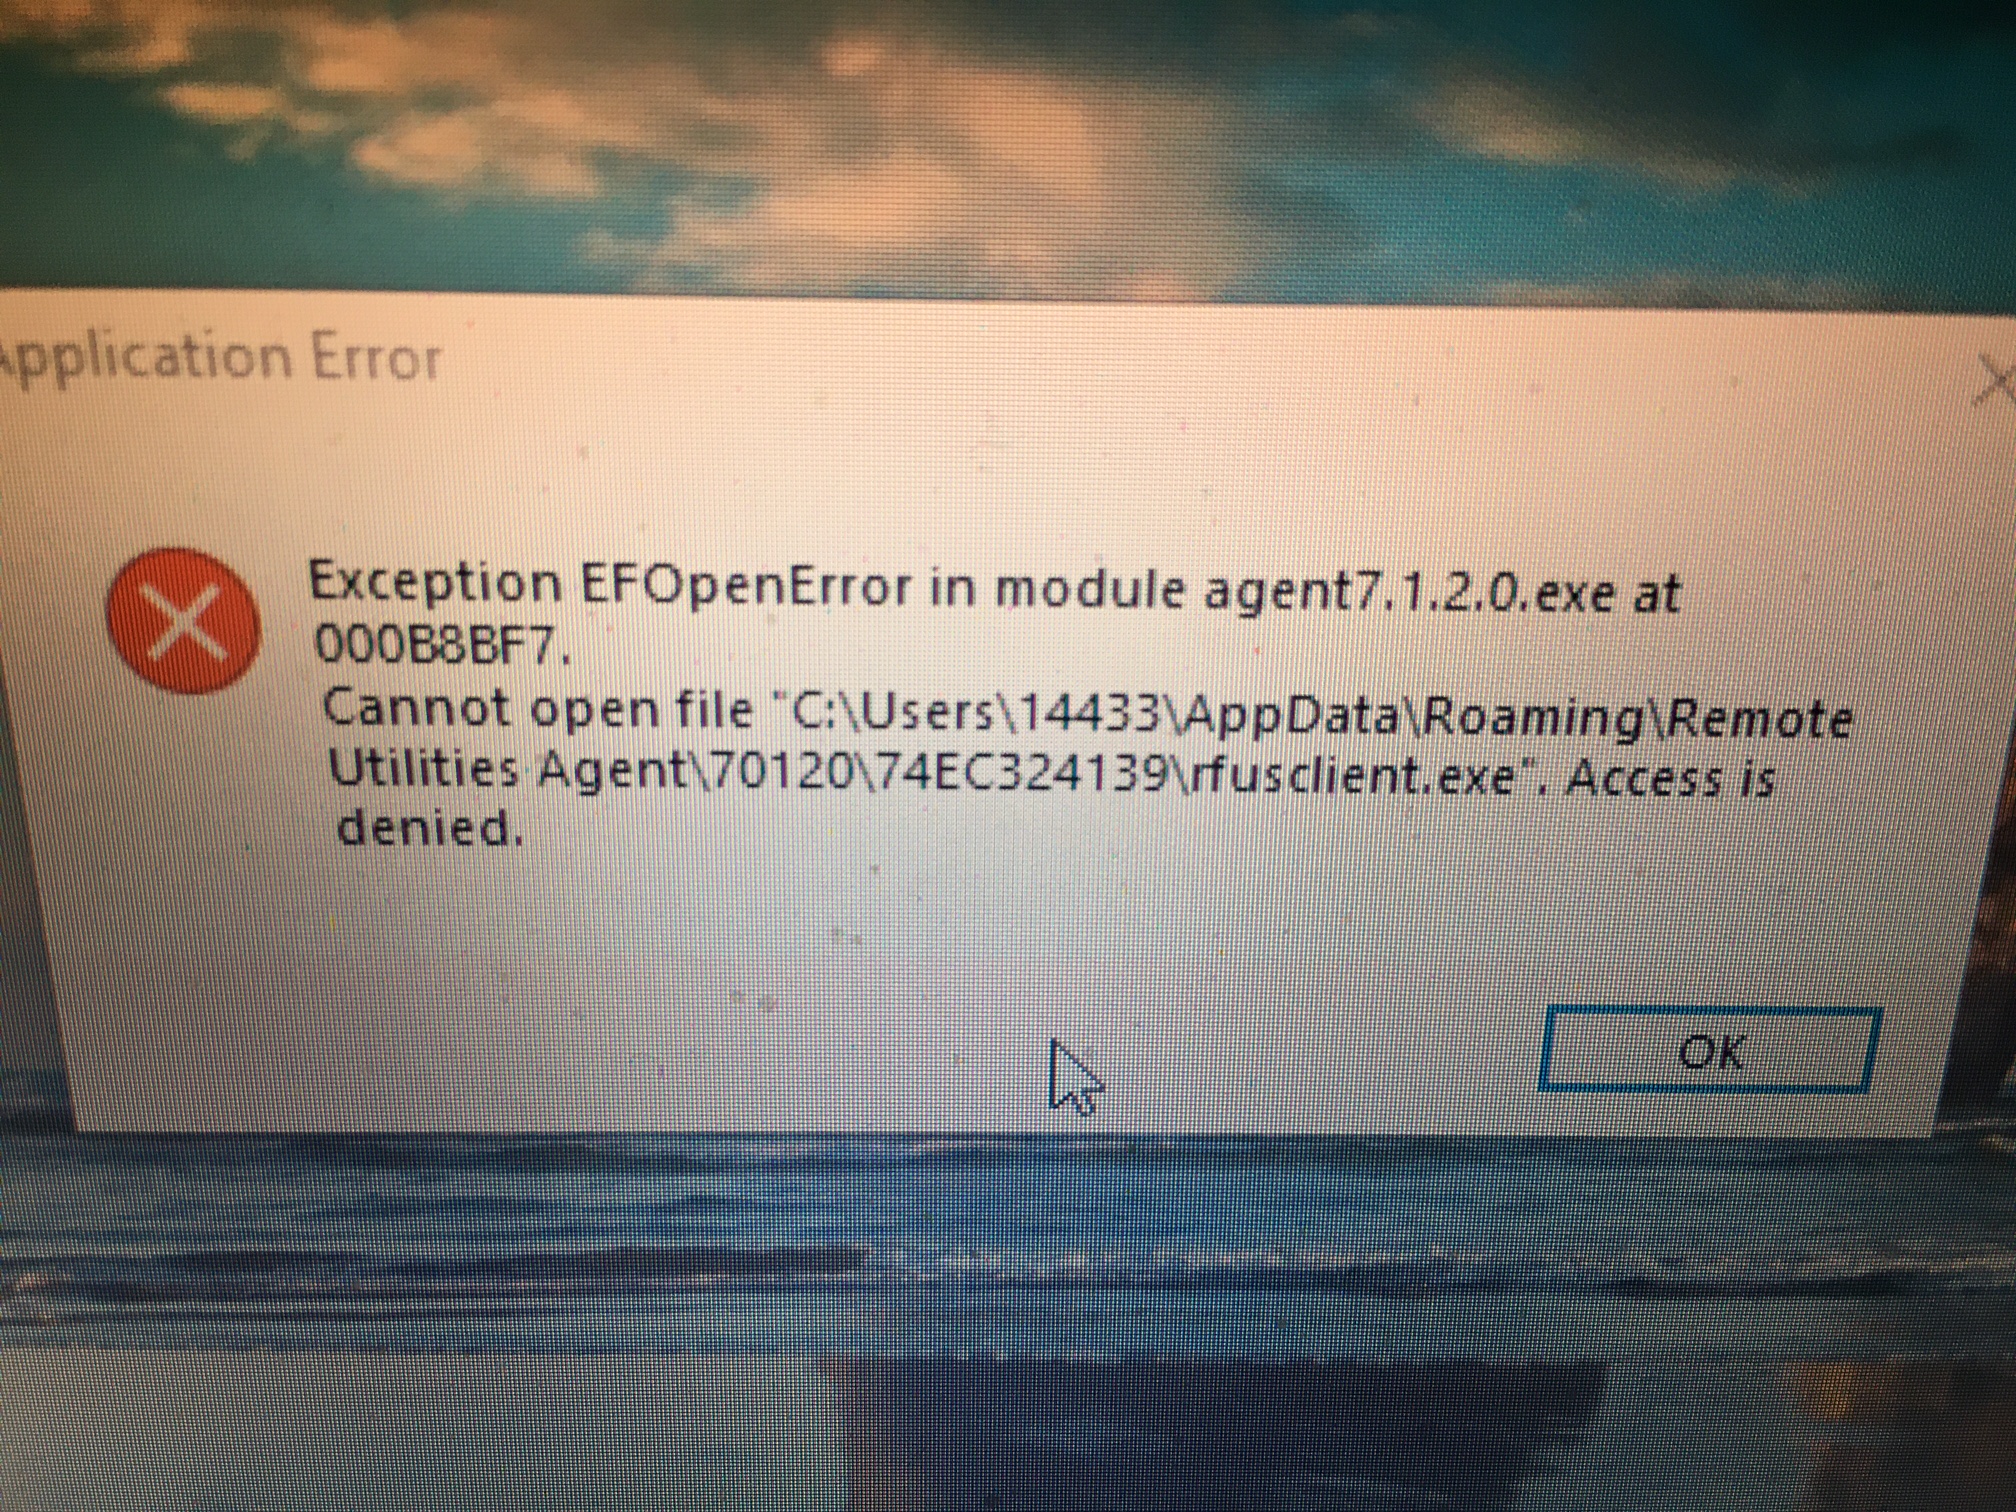 rfusclient.exe is missing upon install